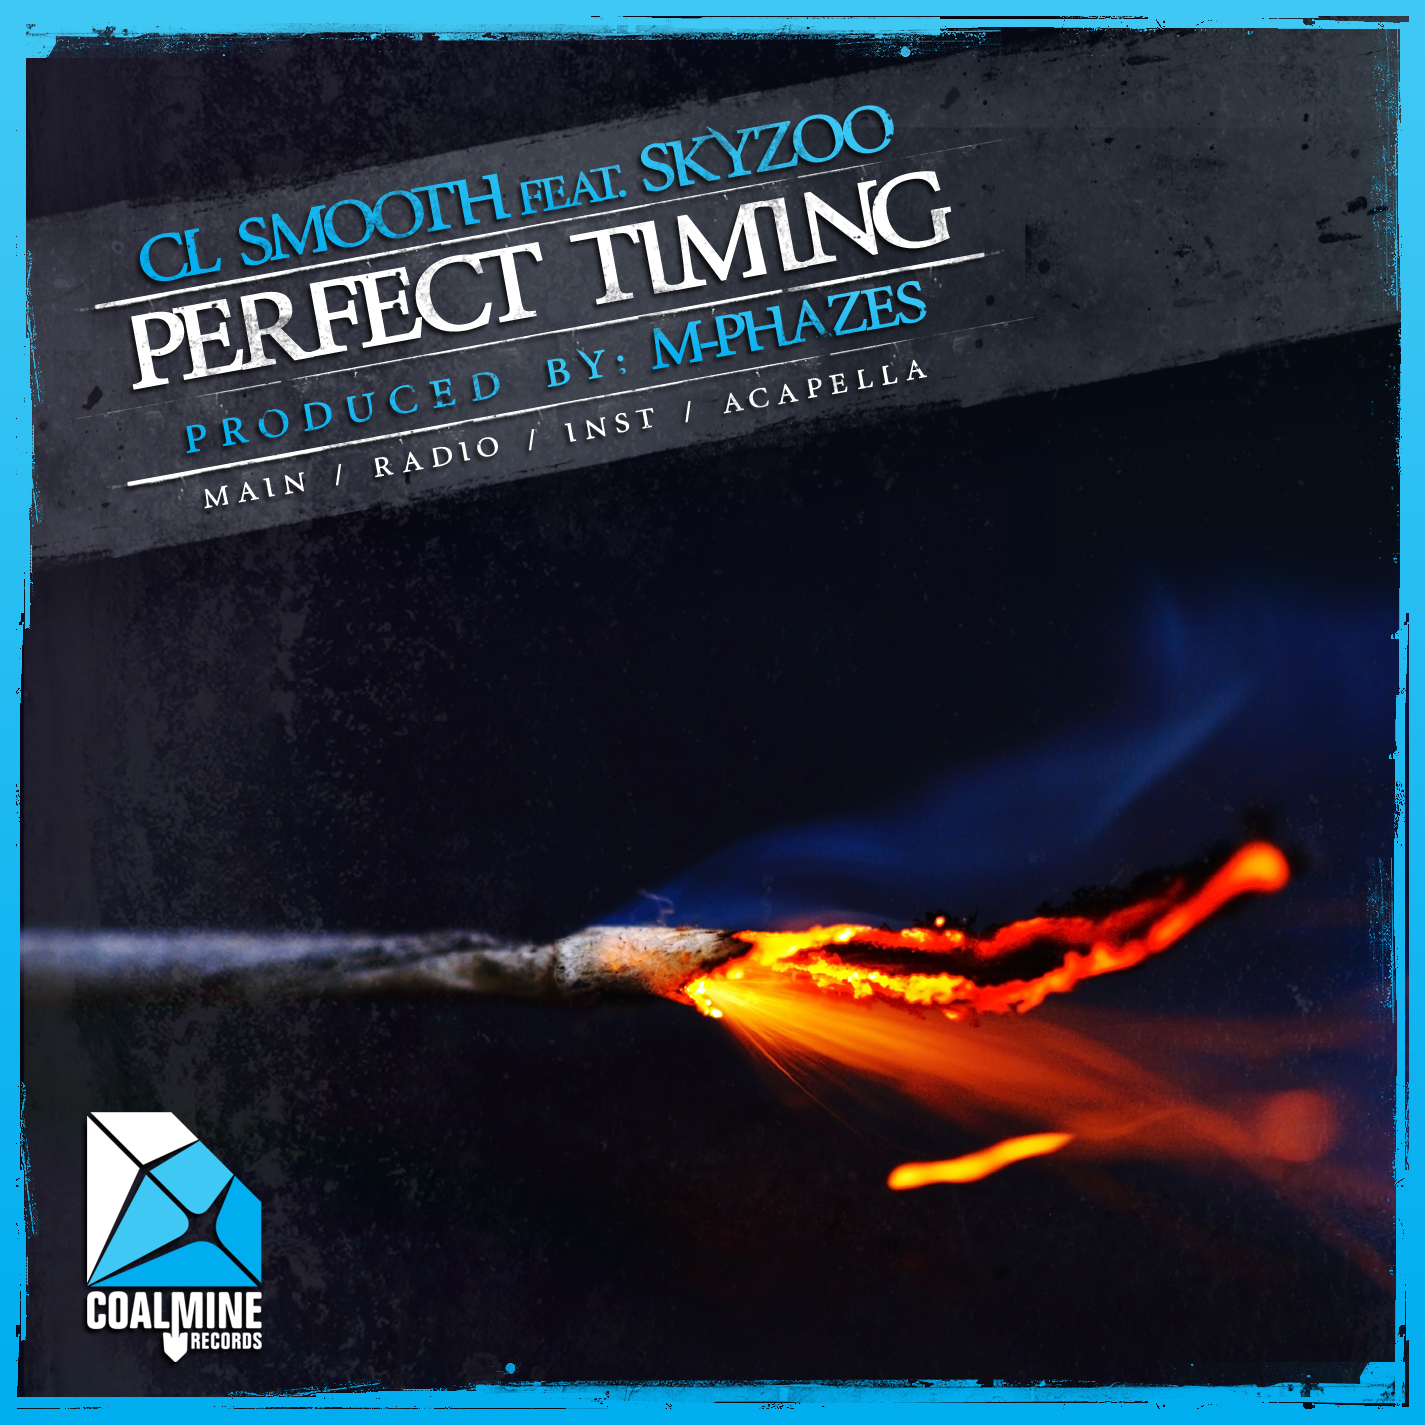 CL Smooth - Perfect Timing Remix Feat Skyzoo (prod by DJ Slider) by ...